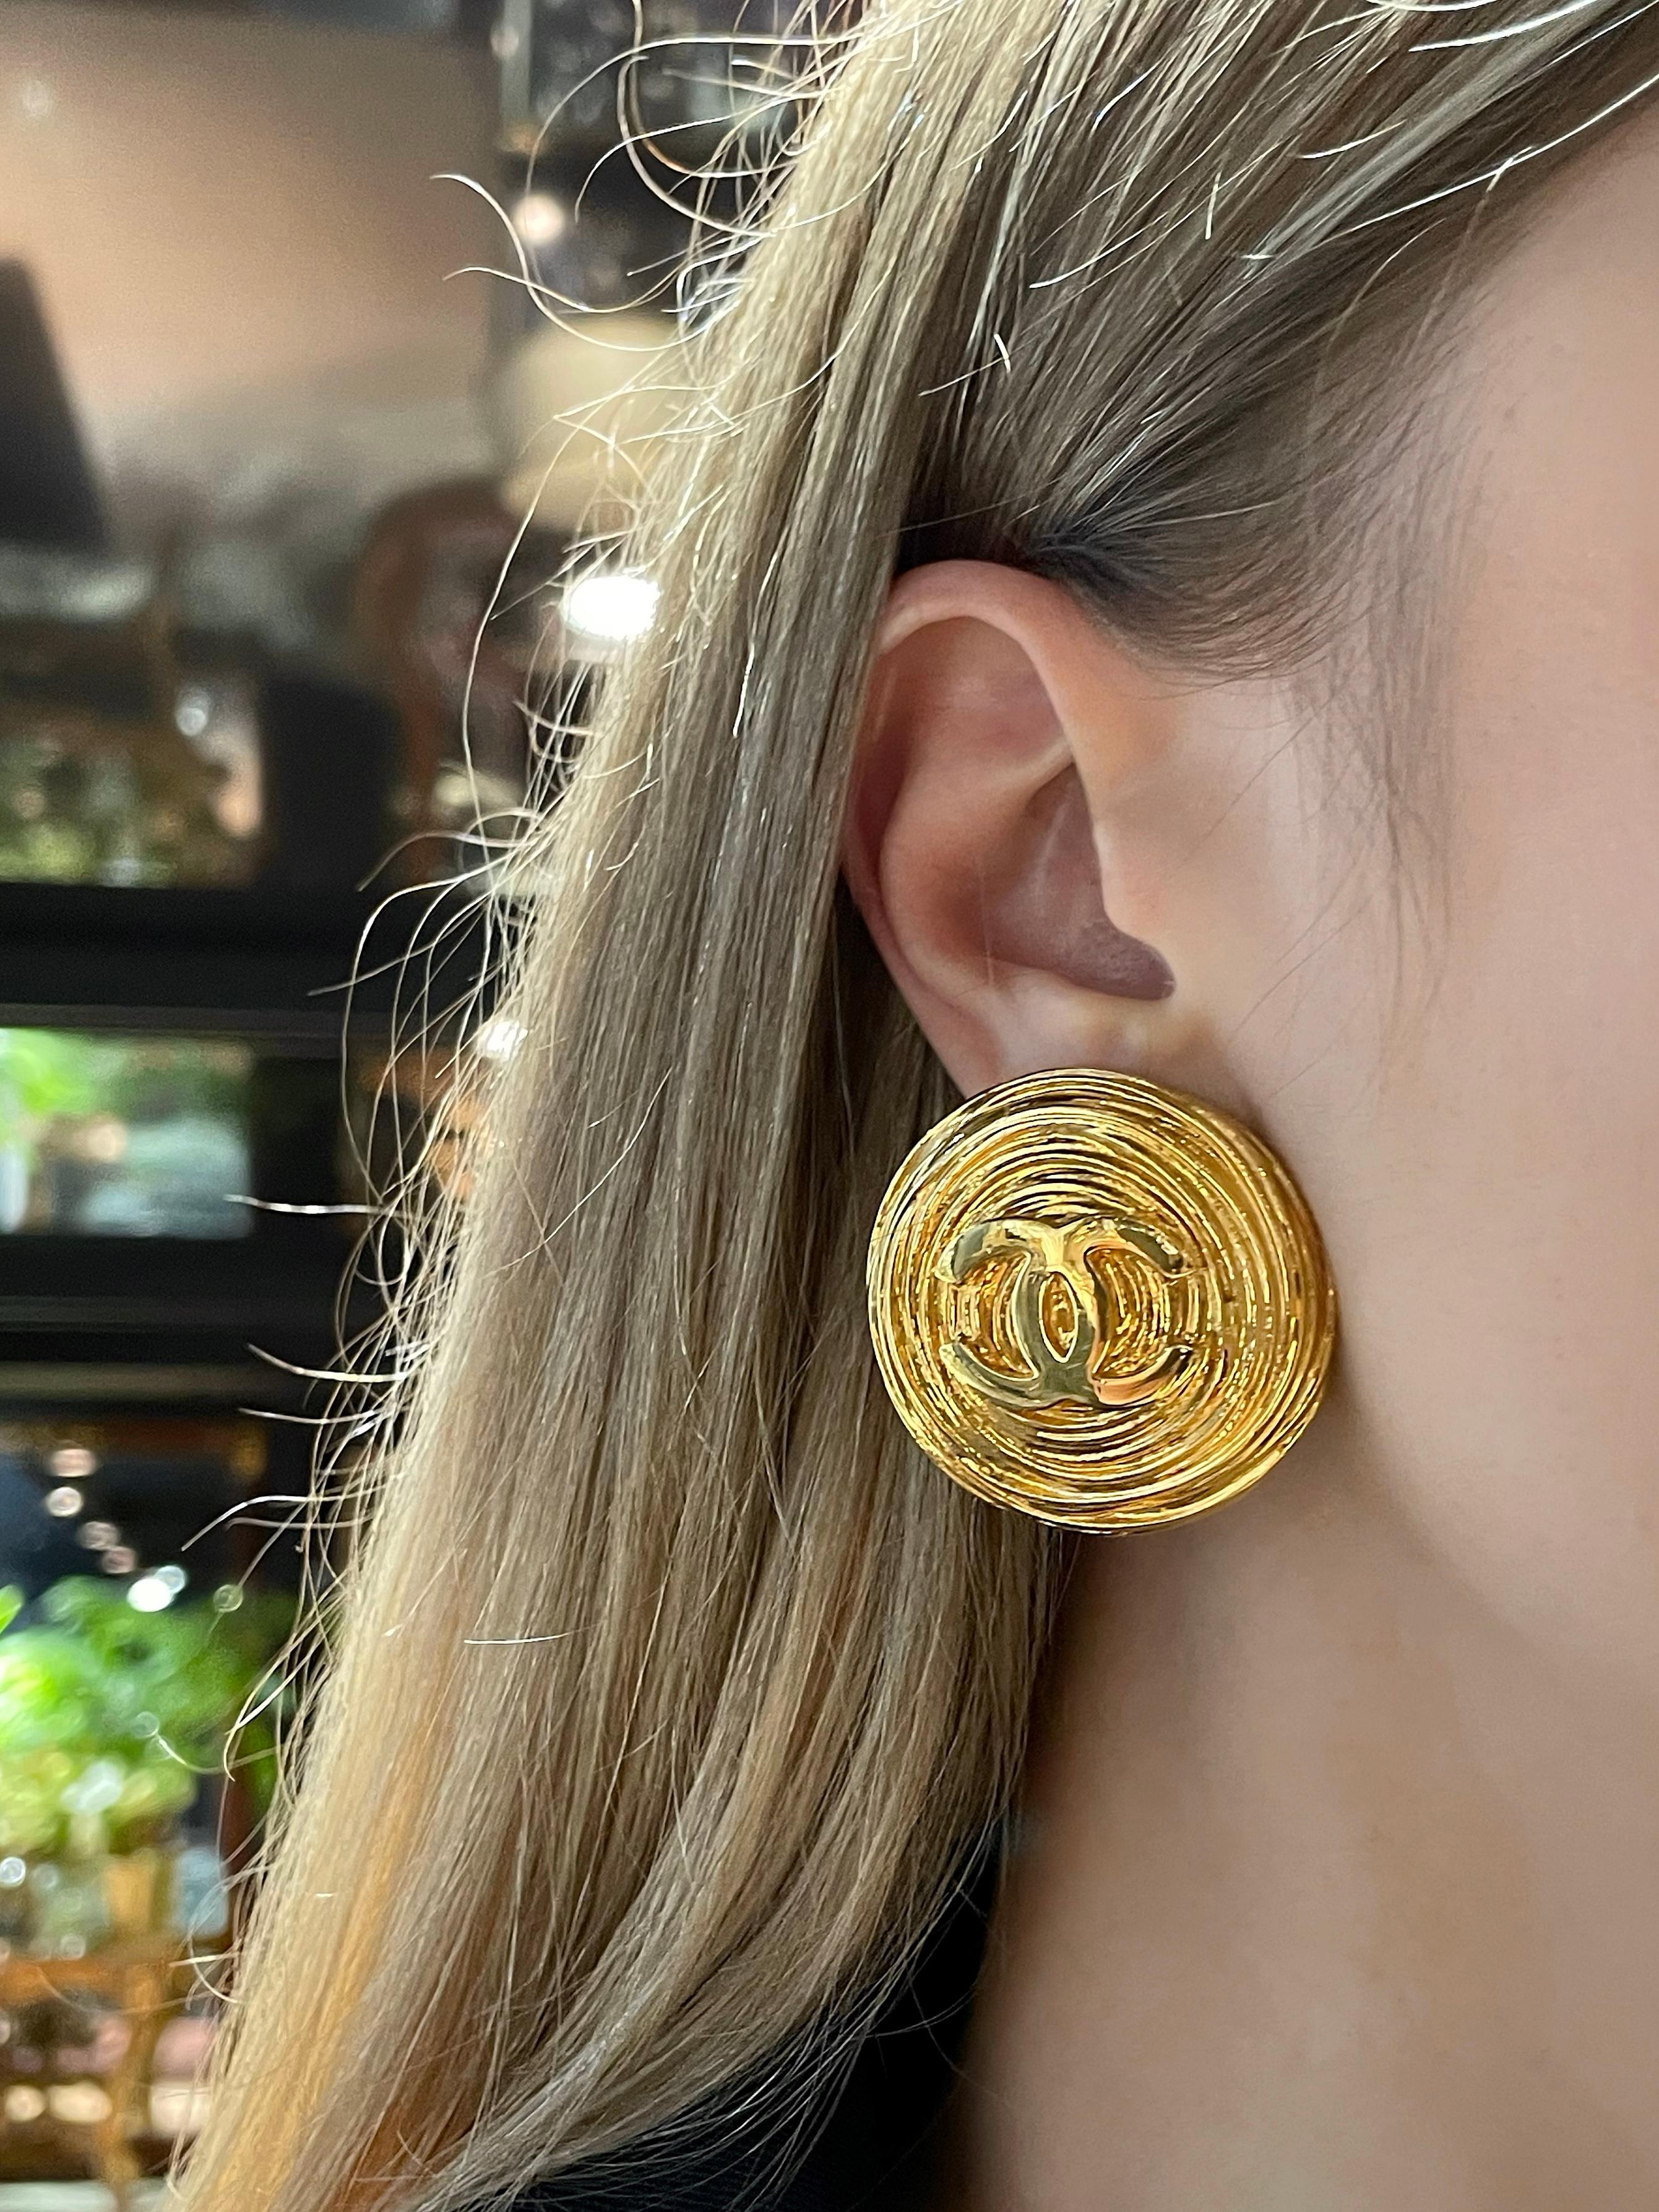 This is a pair of round textured CC logo clip on earrings. The piece is designed by Chanel in 1980s (collection 25). It is crafted in base metal and is gold plated. 

Signed: “© Chanel ® - 25 - Made in France”

Diameter: 4cm

———

If you have any